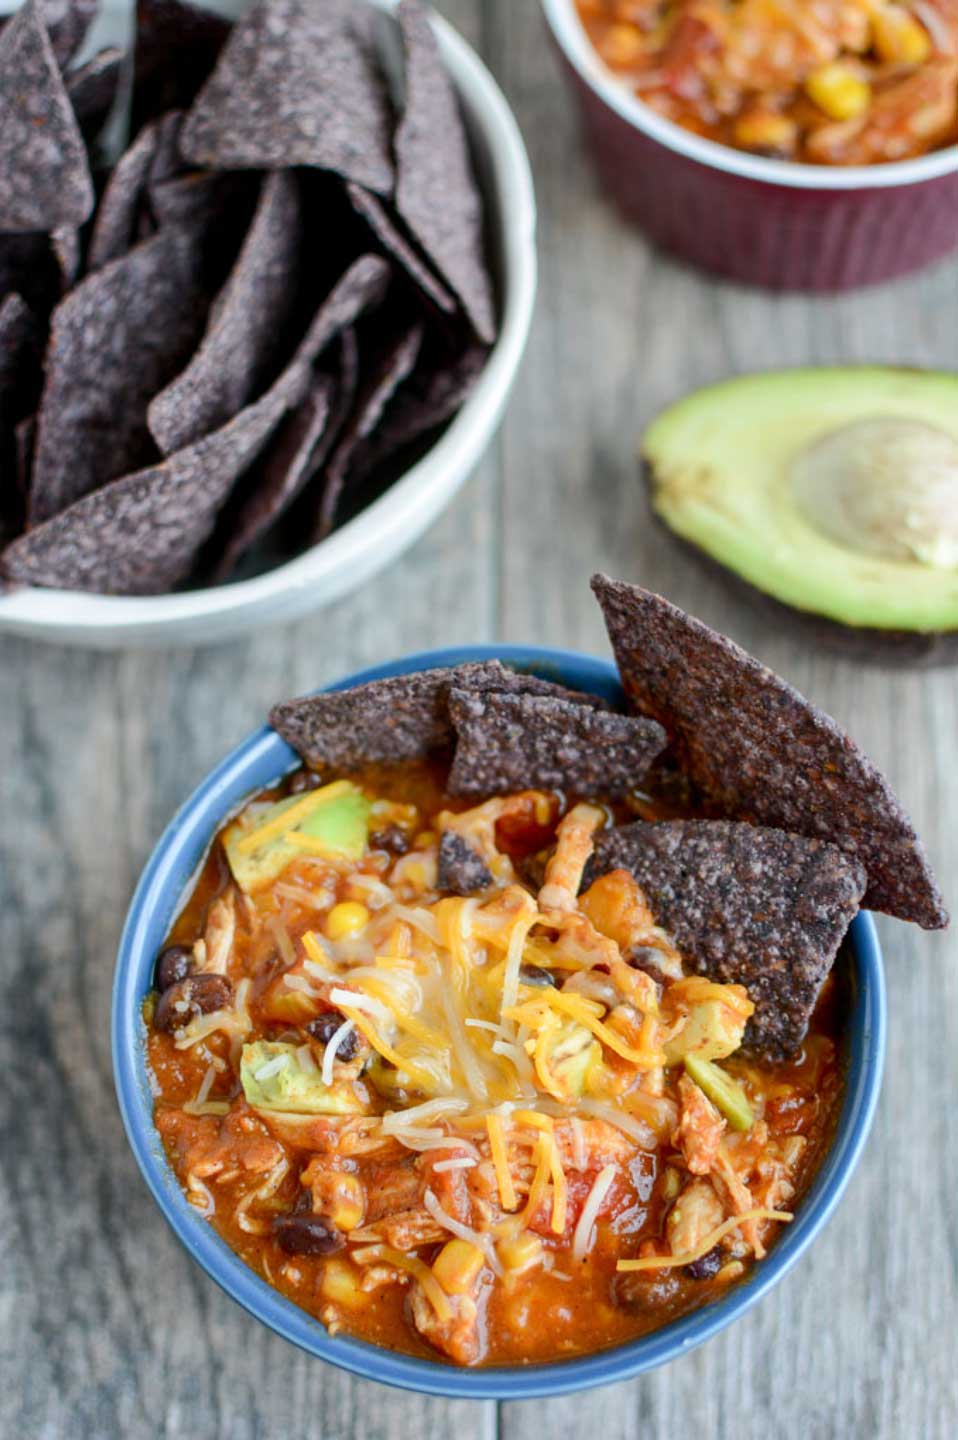 Hey chili lovers! Here’s a scrumptious, healthier idea that’s ready super-fast! Try Sweet Potato Chicken Chili from Lindsay at The Lean Green Bean – just one of 17 featured chili recipes that are all specifically created for electric pressure cookers!